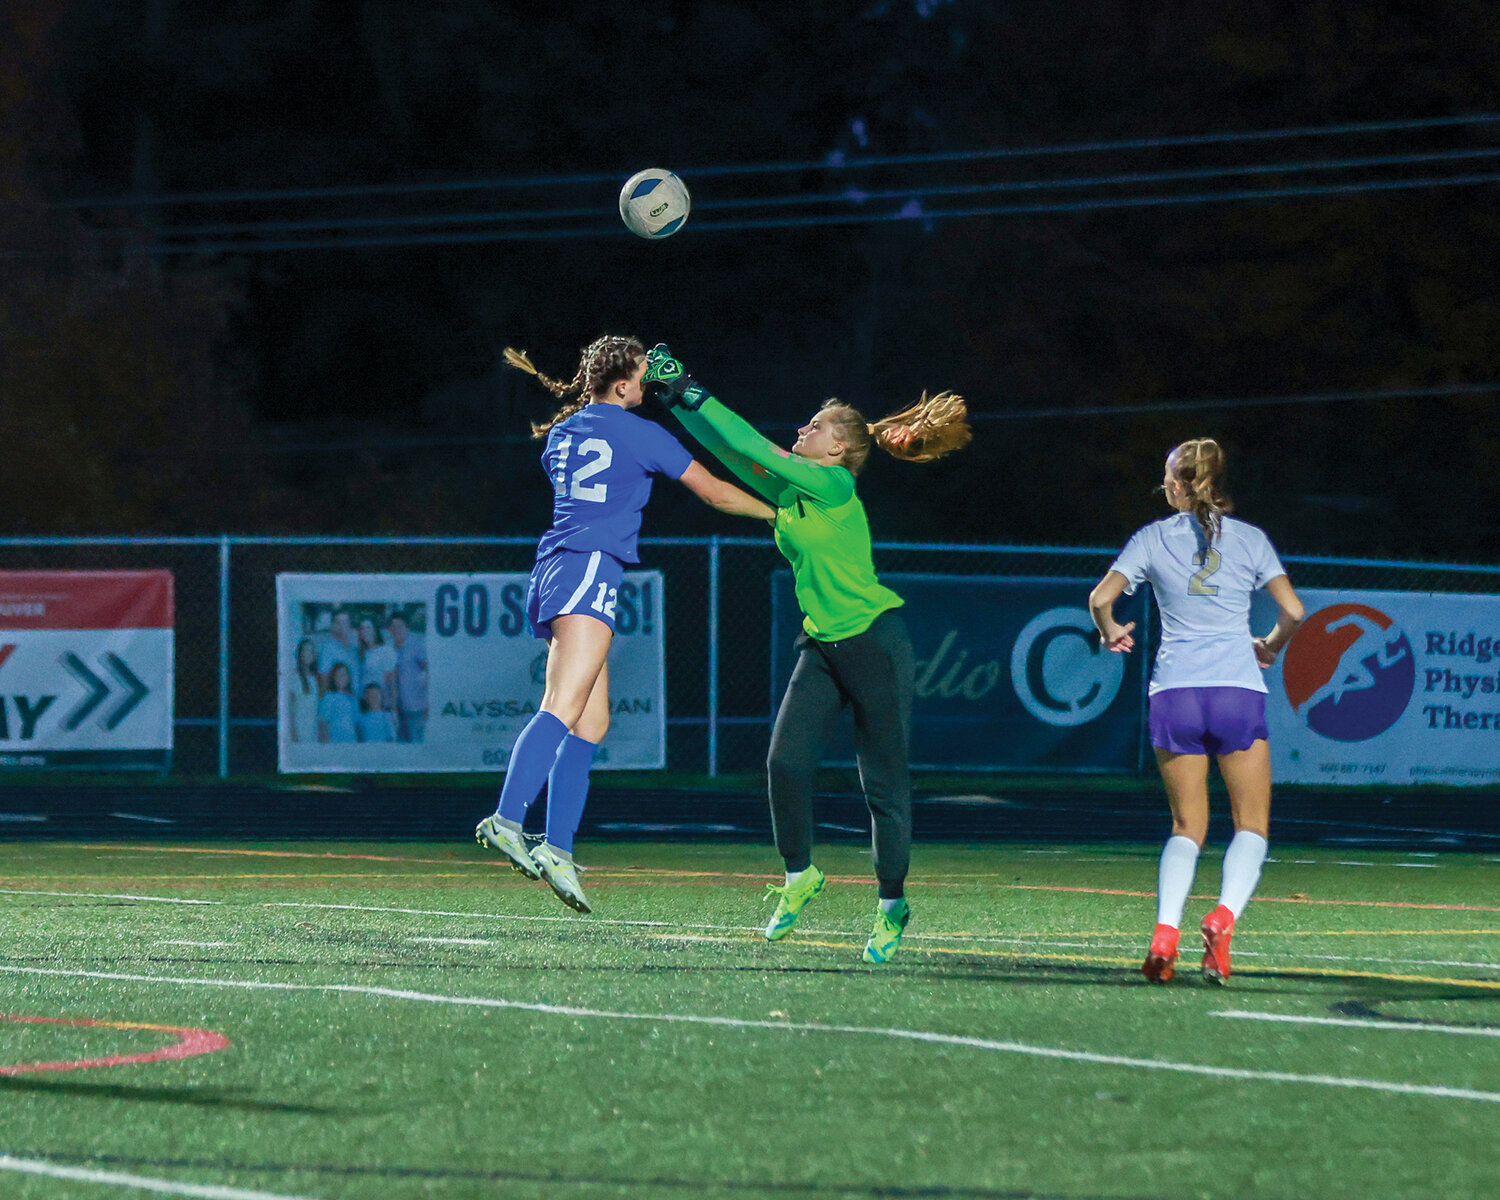 The Ridgefield Spudders’ Marlee Buffham battles for the ball against the Sequim Wolves’ goalkeeper in the first round of the 2A state playoffs on Wednesday, Nov. 8.